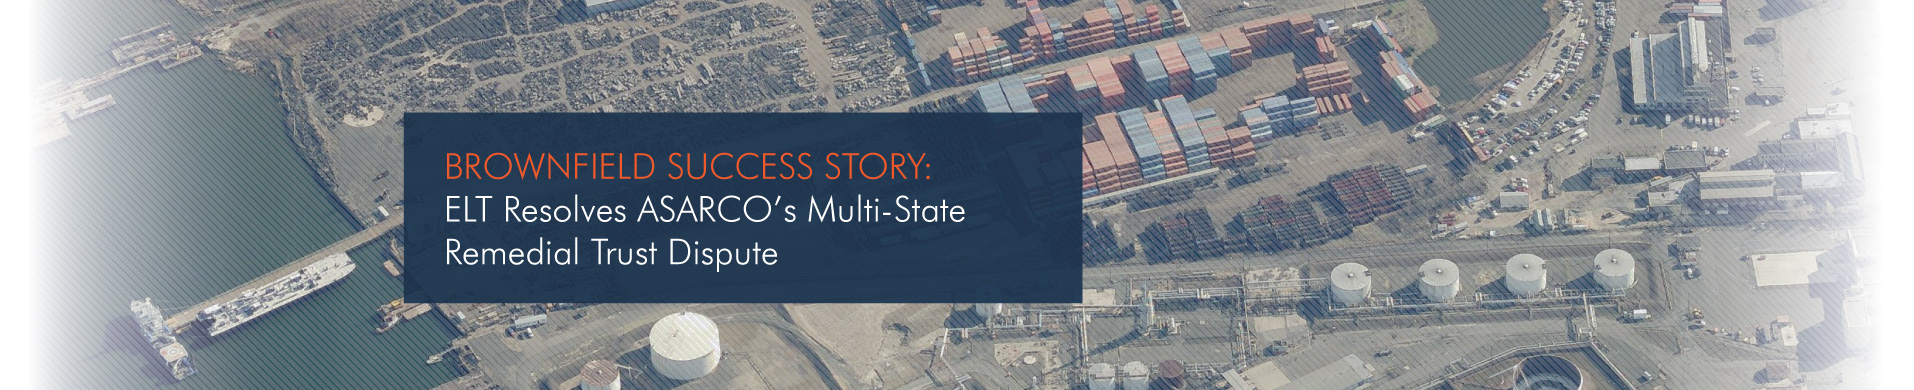 Brownfield Success Story: ASARCO